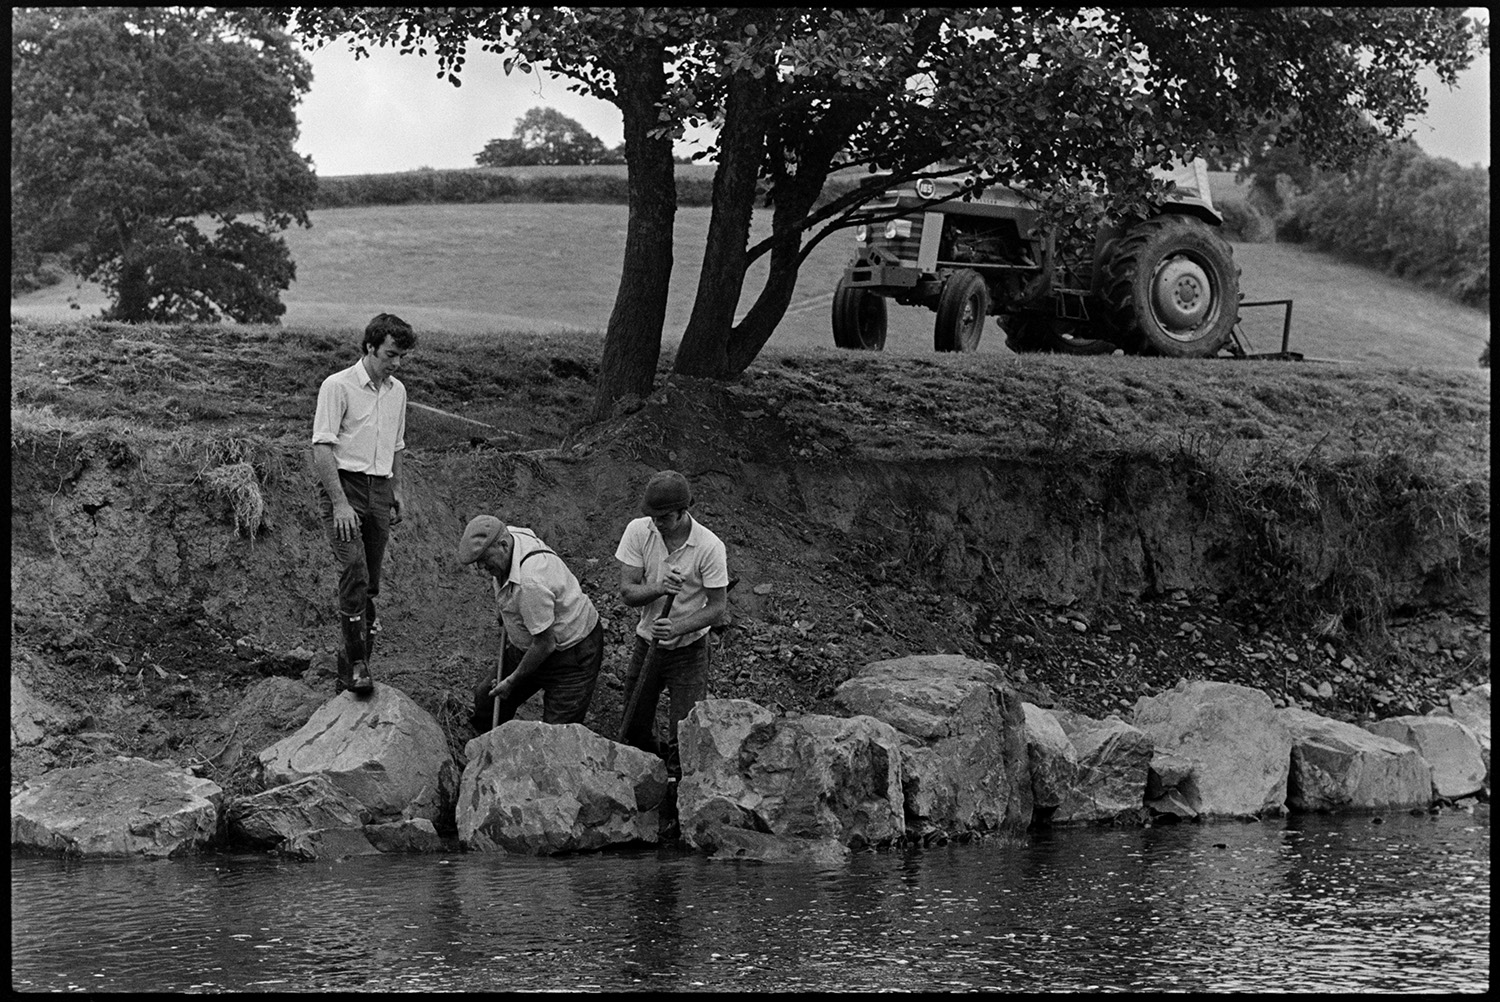 Farmers putting boulders to protect river bank. 
[John Ward and his two sons, Graham Ward and David Ward, moving boulders with crow bars by a river bank, to protect the bank from erosion , at Parsonage, Iddesleigh. The tractor they have used to transport the boulders can be seen in a field in the background.]